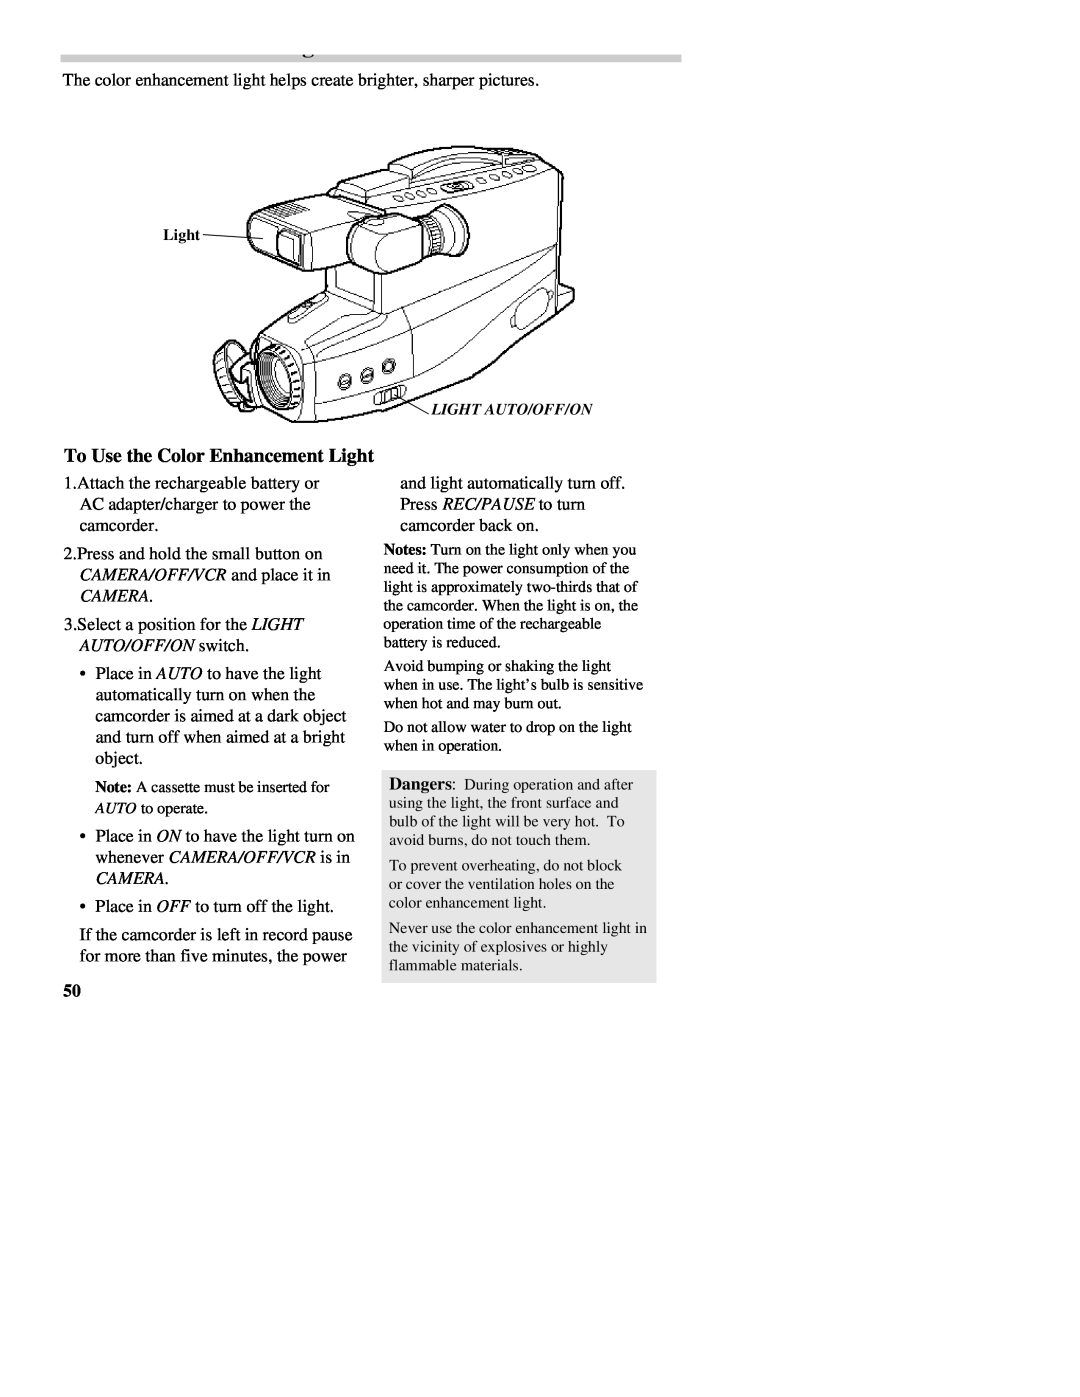 RCA CC437 manual To Use the Color Enhancement Light 